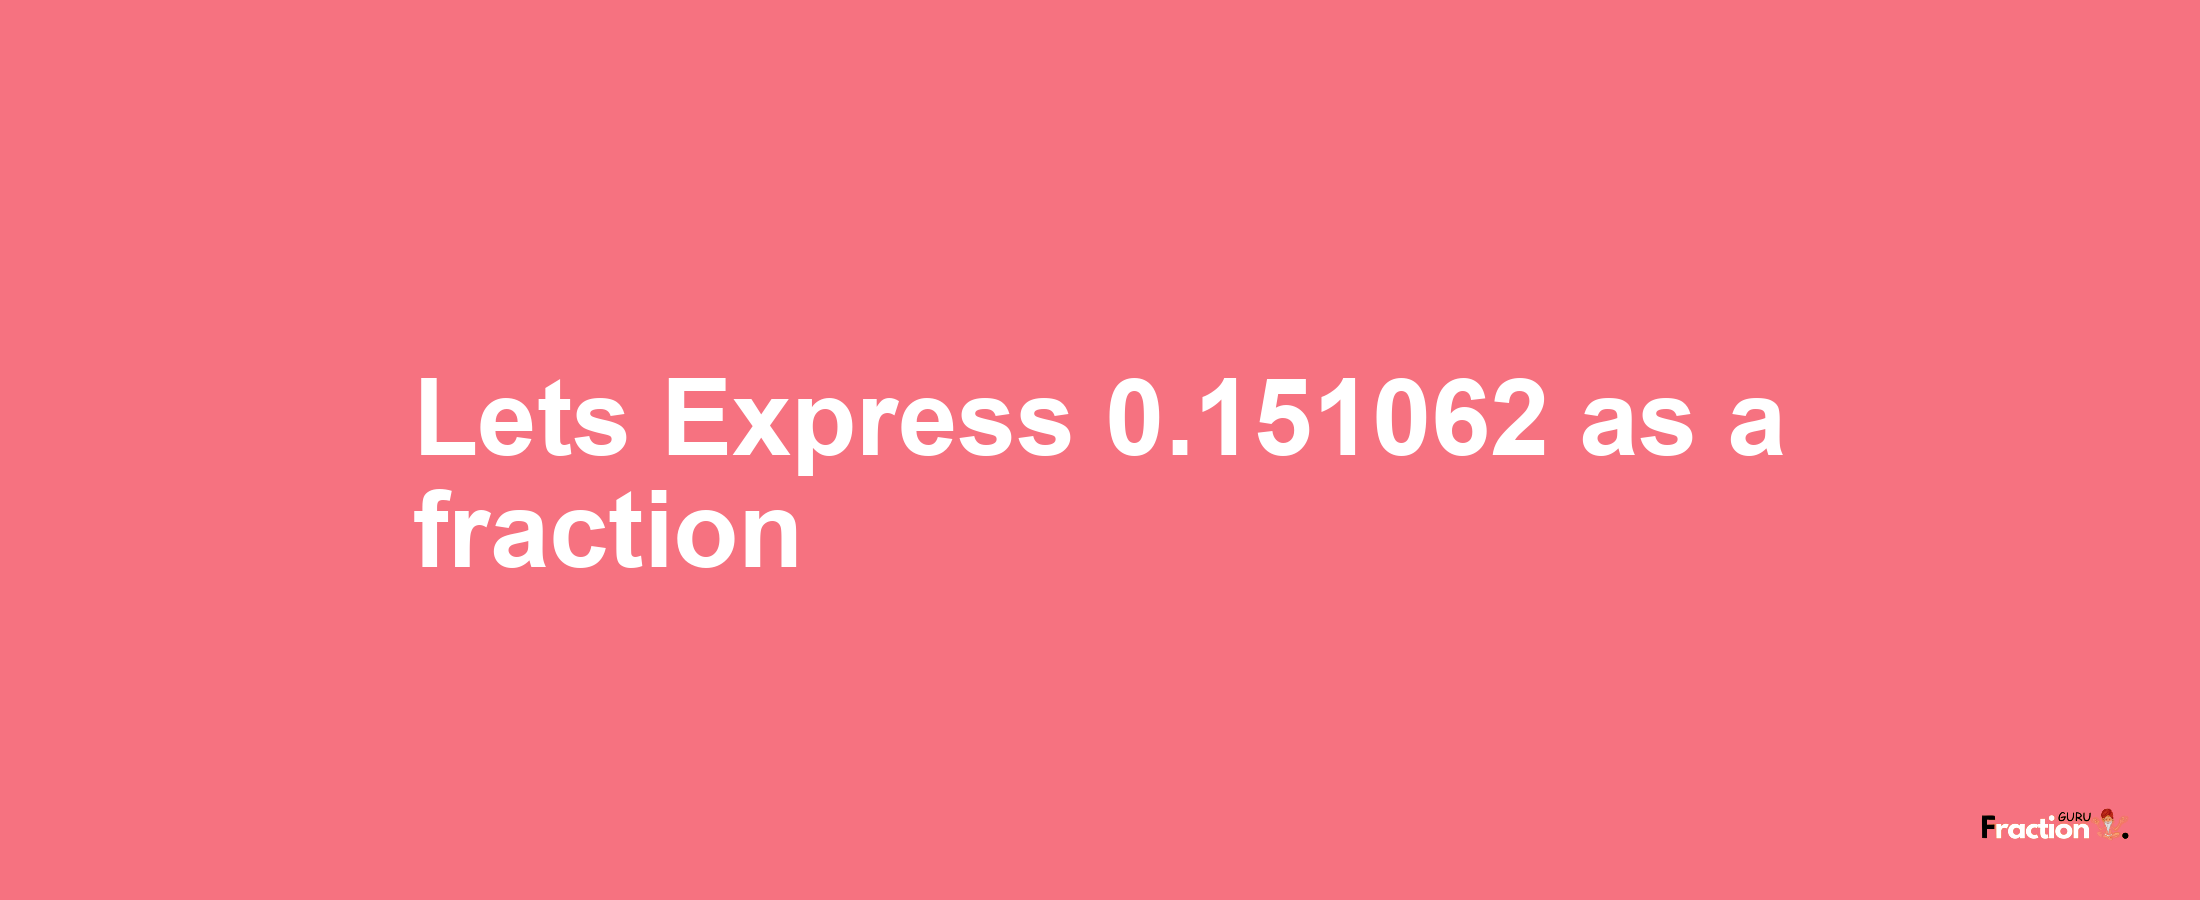 Lets Express 0.151062 as afraction